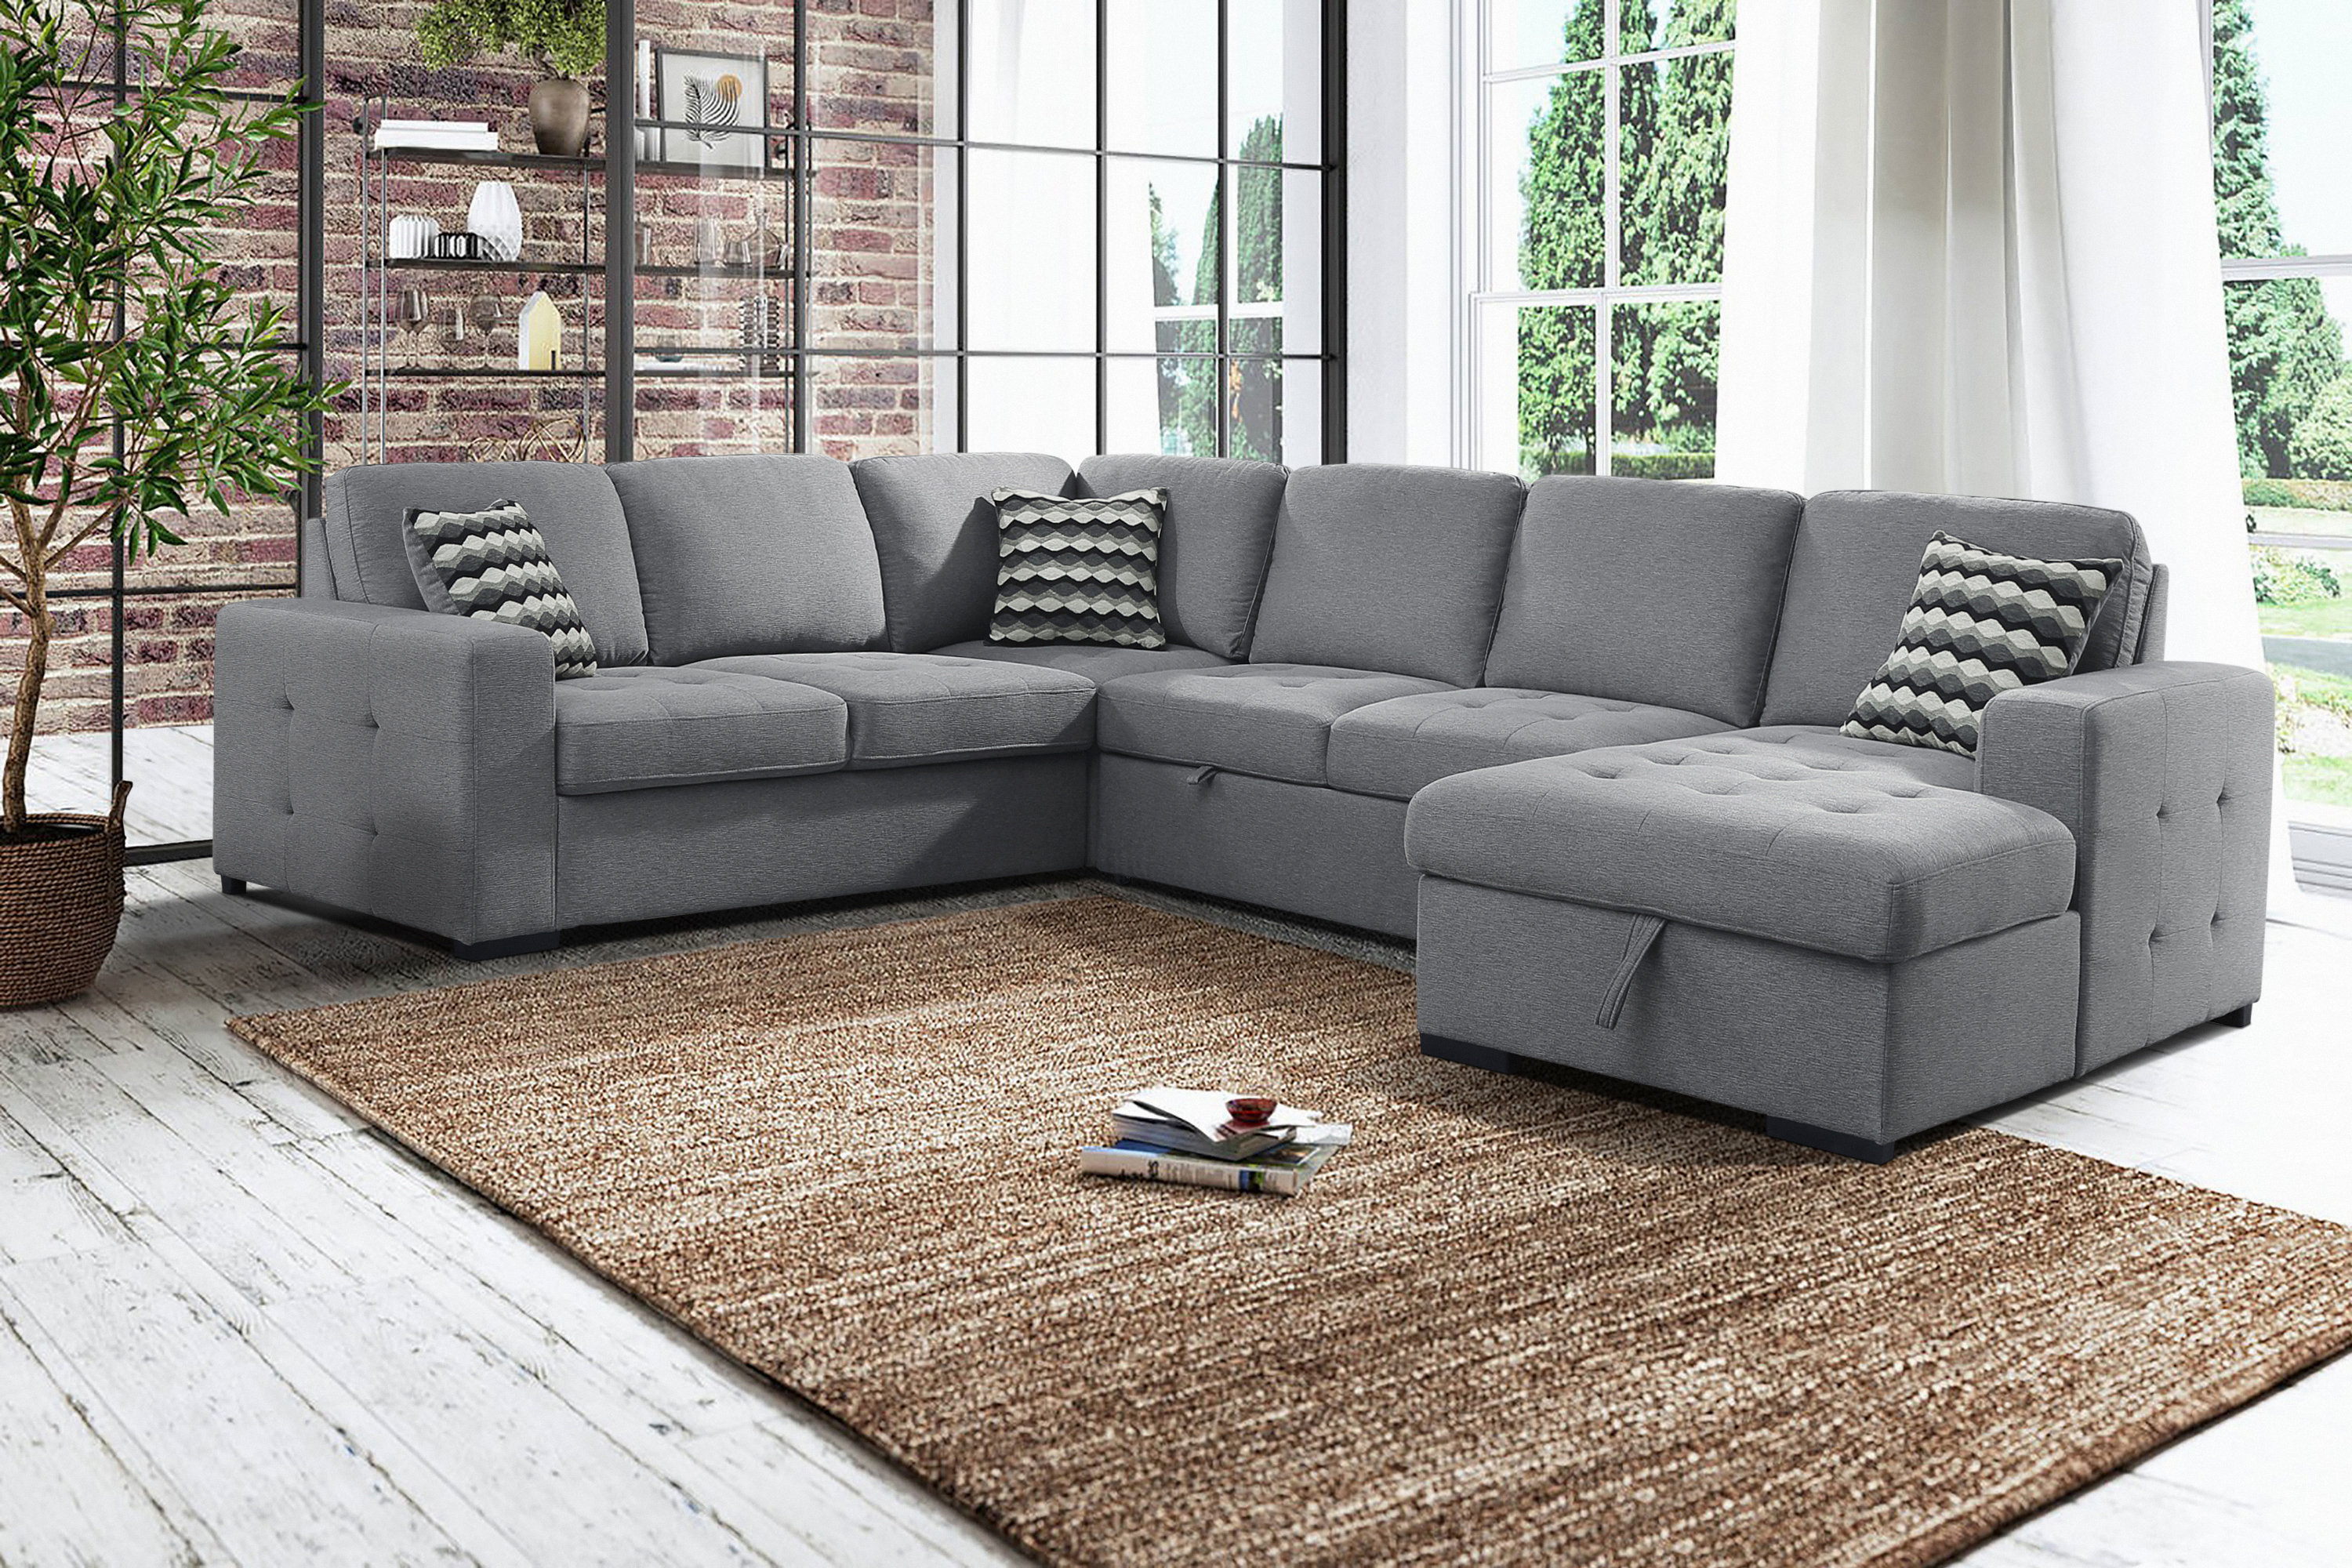 4 Piece Fabric Upholstered Sectional Sofa With Pull Out Bed 